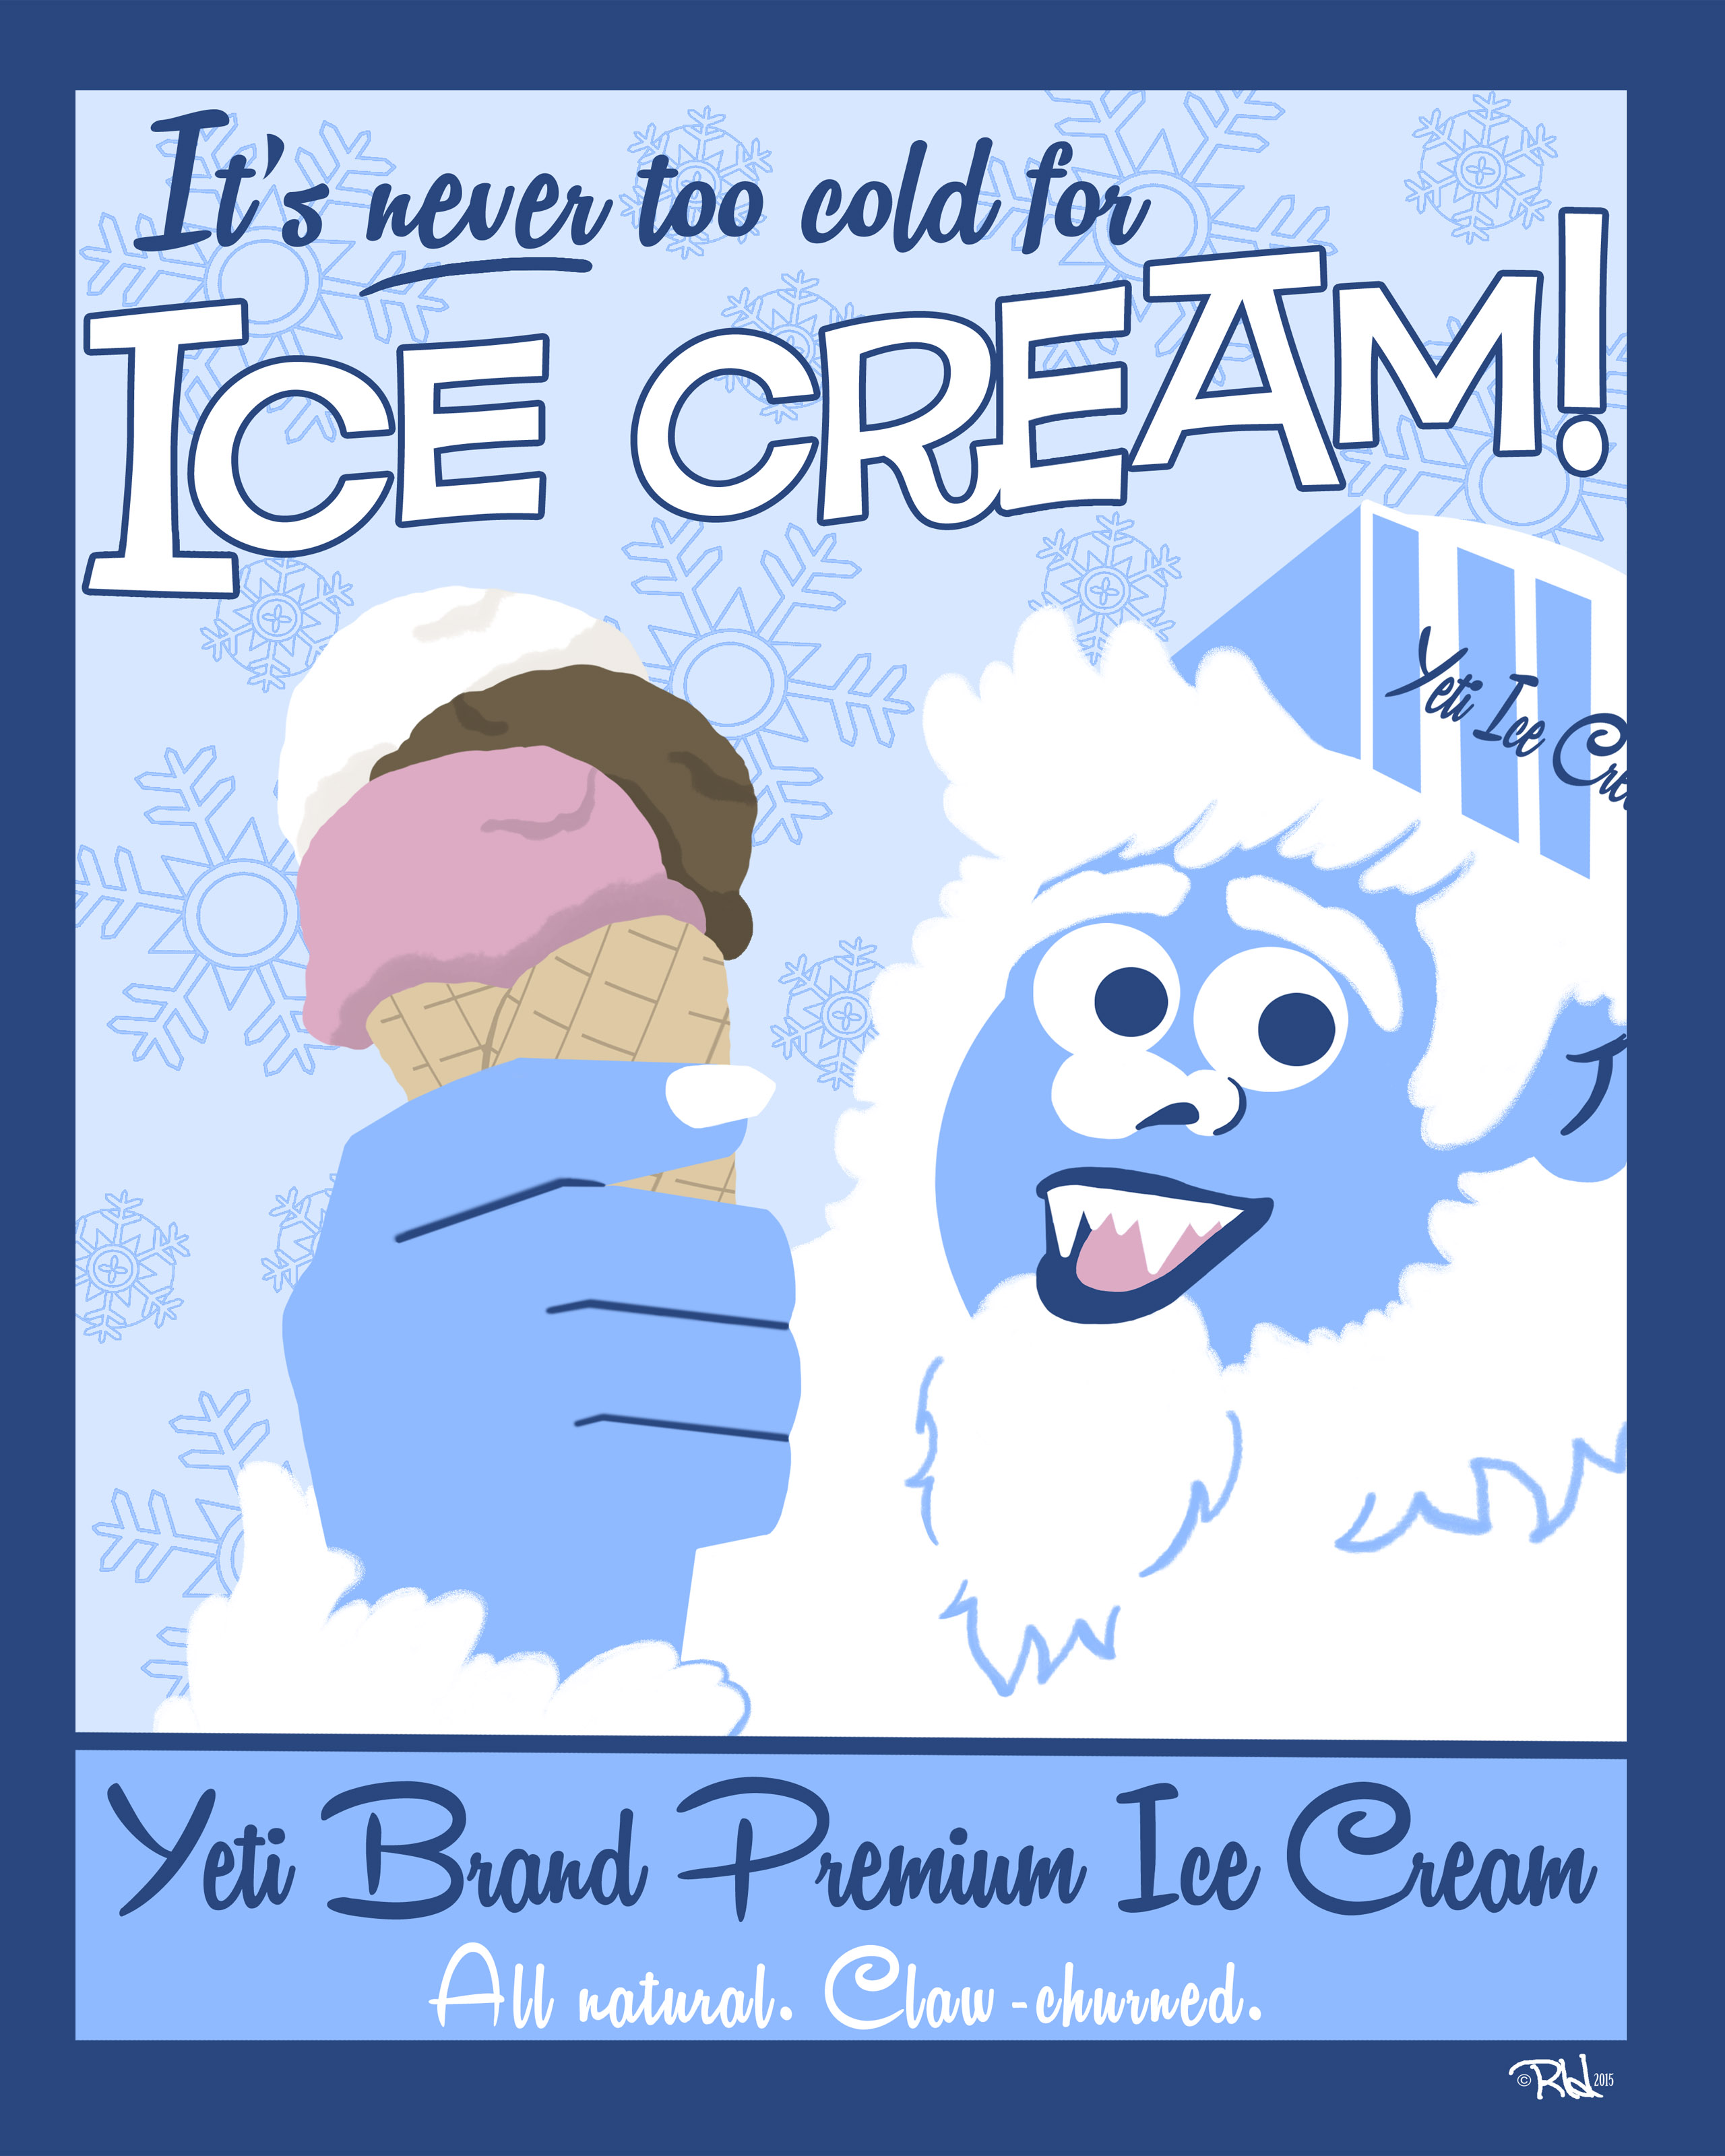 A yeti wearing a paper hat holds a triple-scoop cone of ice cream under the headline “It’s never too cold for ice cream!” The caption reads “Yeti Brand Premium Ice Cream — All natural. Claw churned.